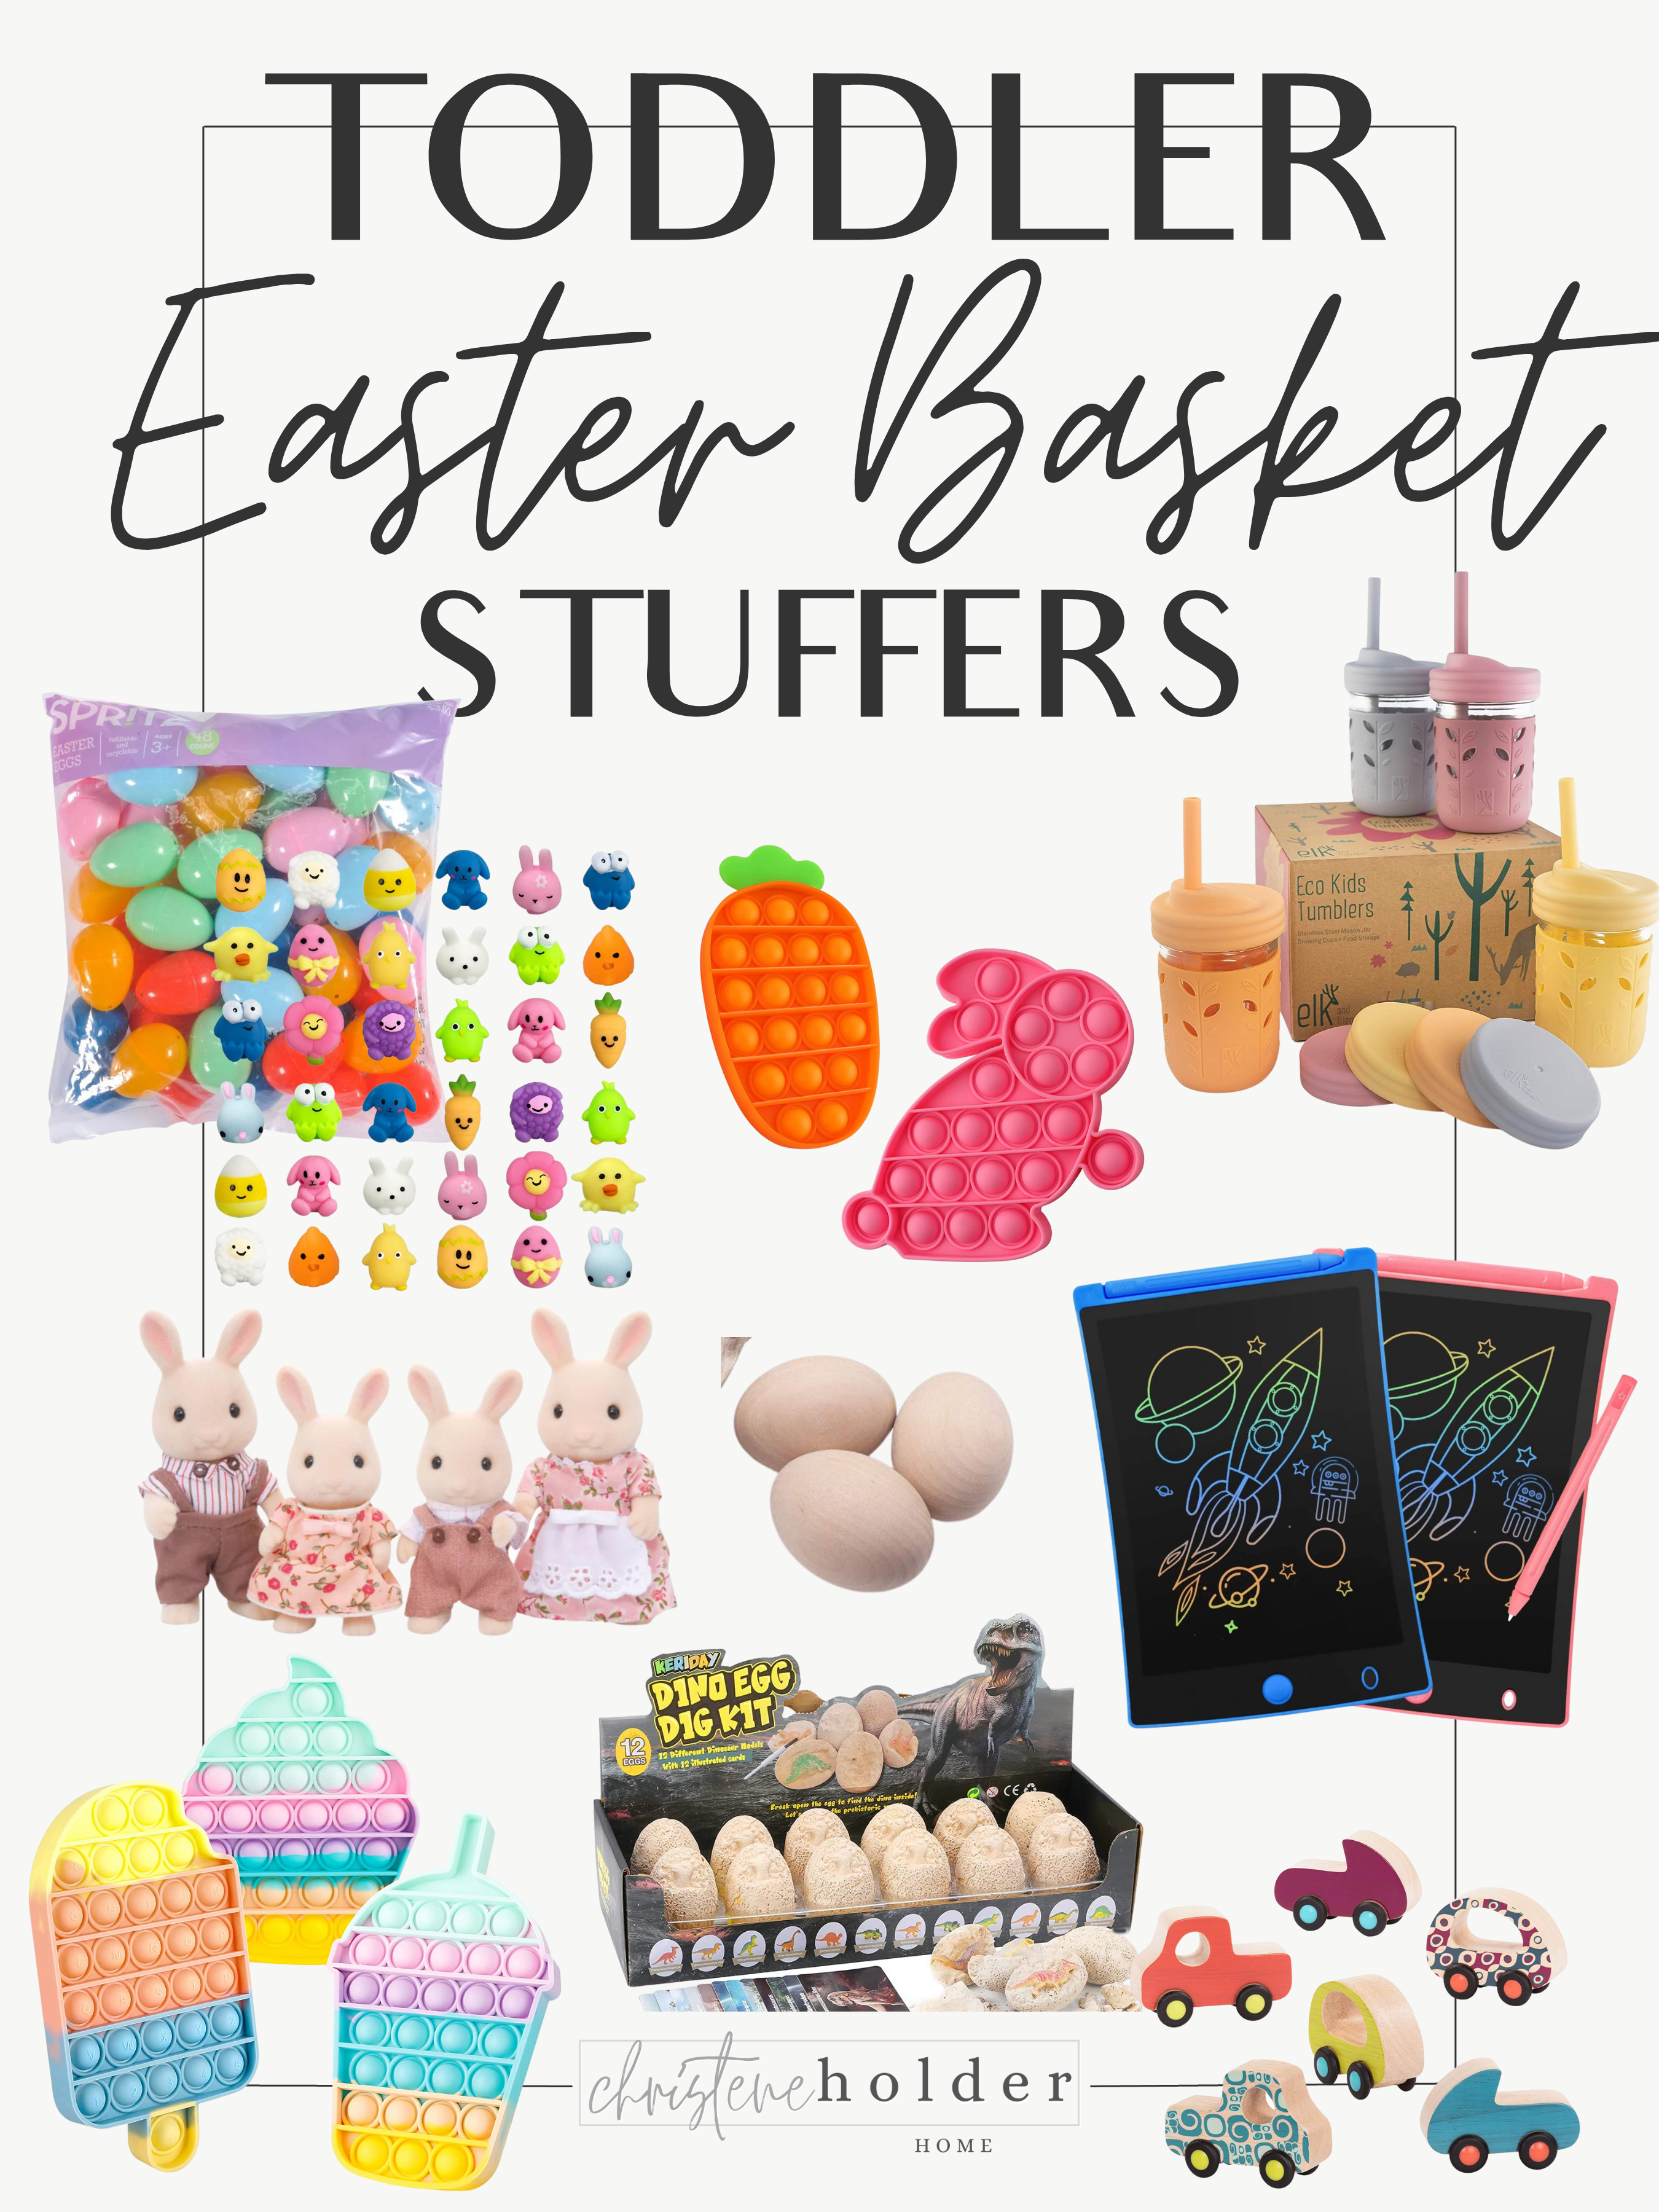 small toys for toddler Easter basket stuffers